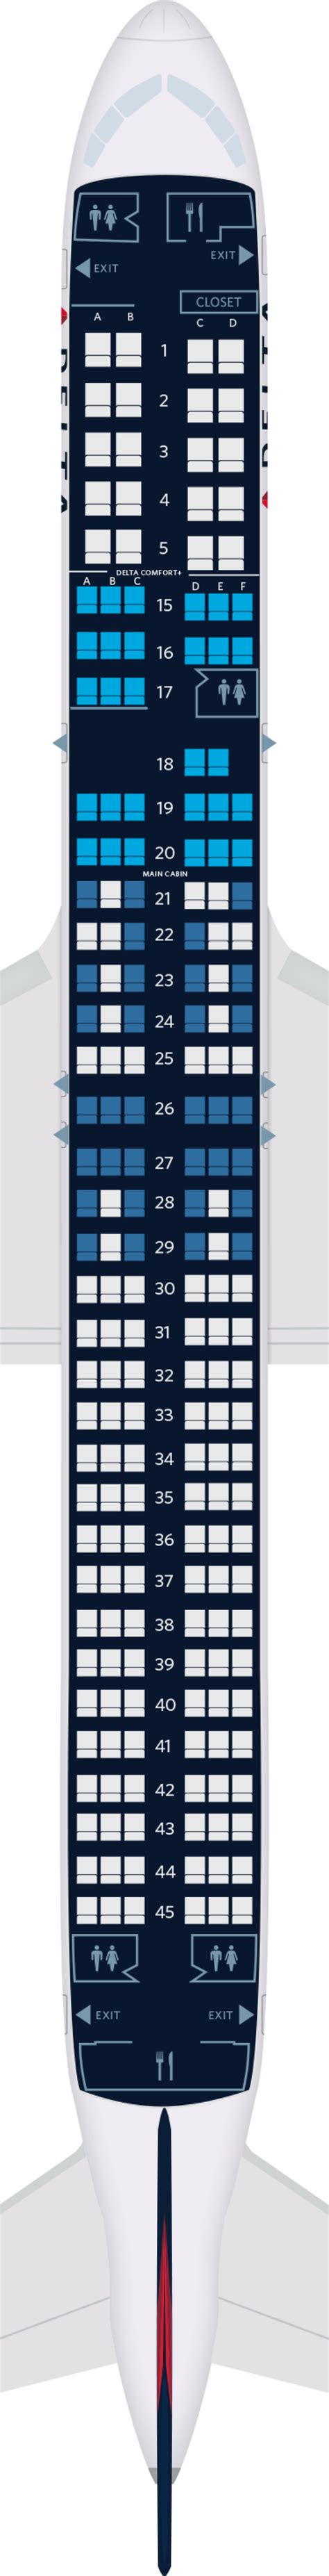 boeing 757 seating chart image